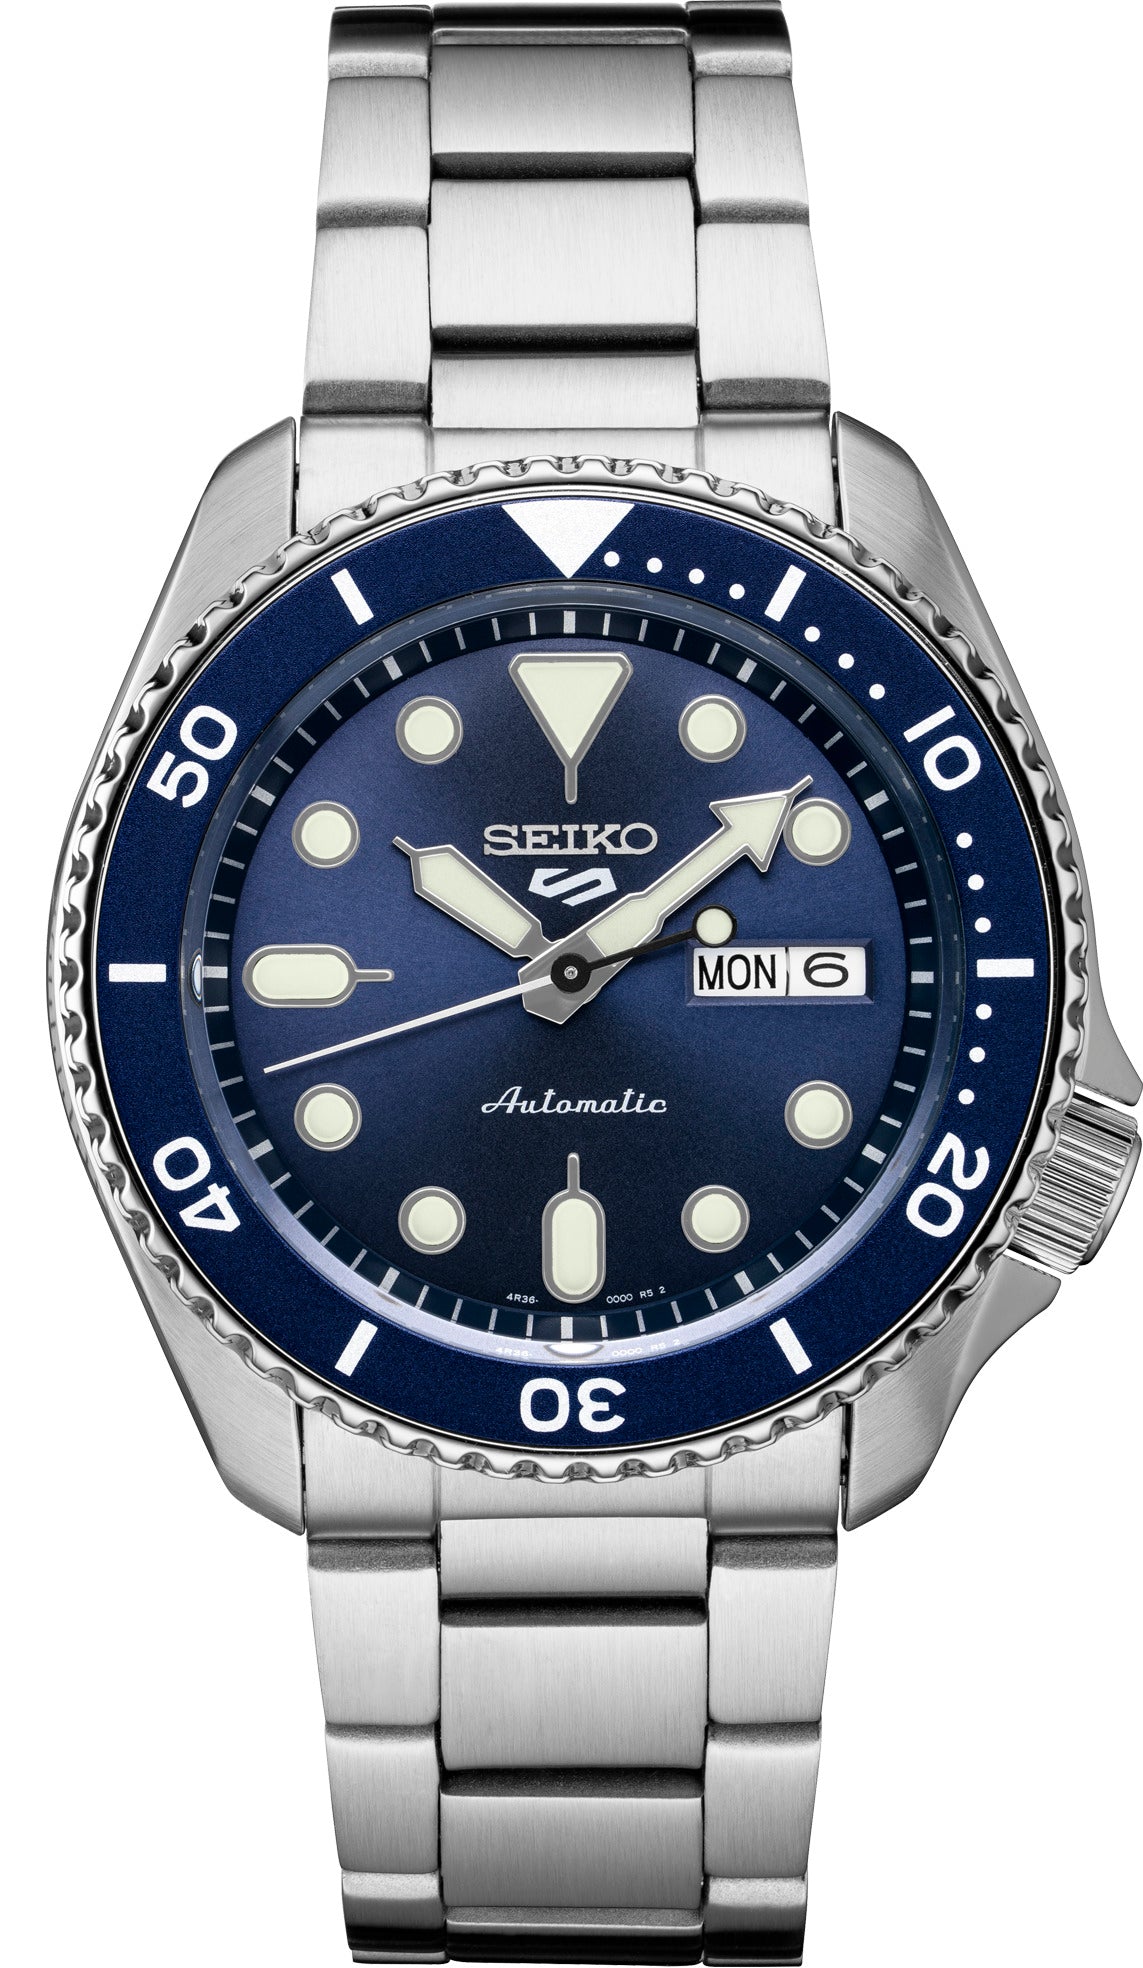 Seiko 5 Sports Men's Stainless Watch in color Silver-Tone, Blue from the front view